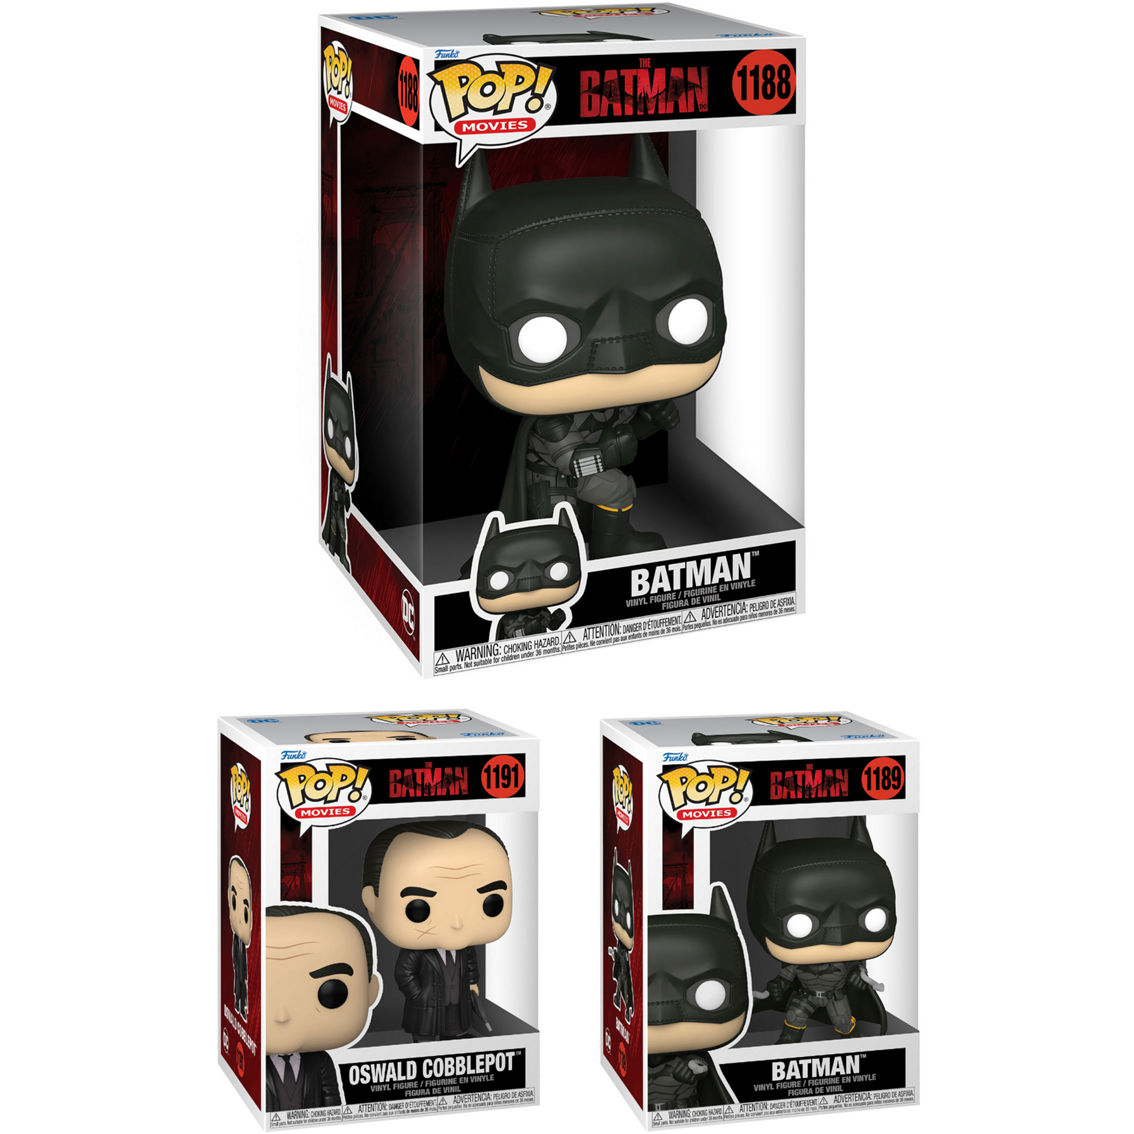 Funko POP Movies The Batman Collector's Set - Image 2 of 8